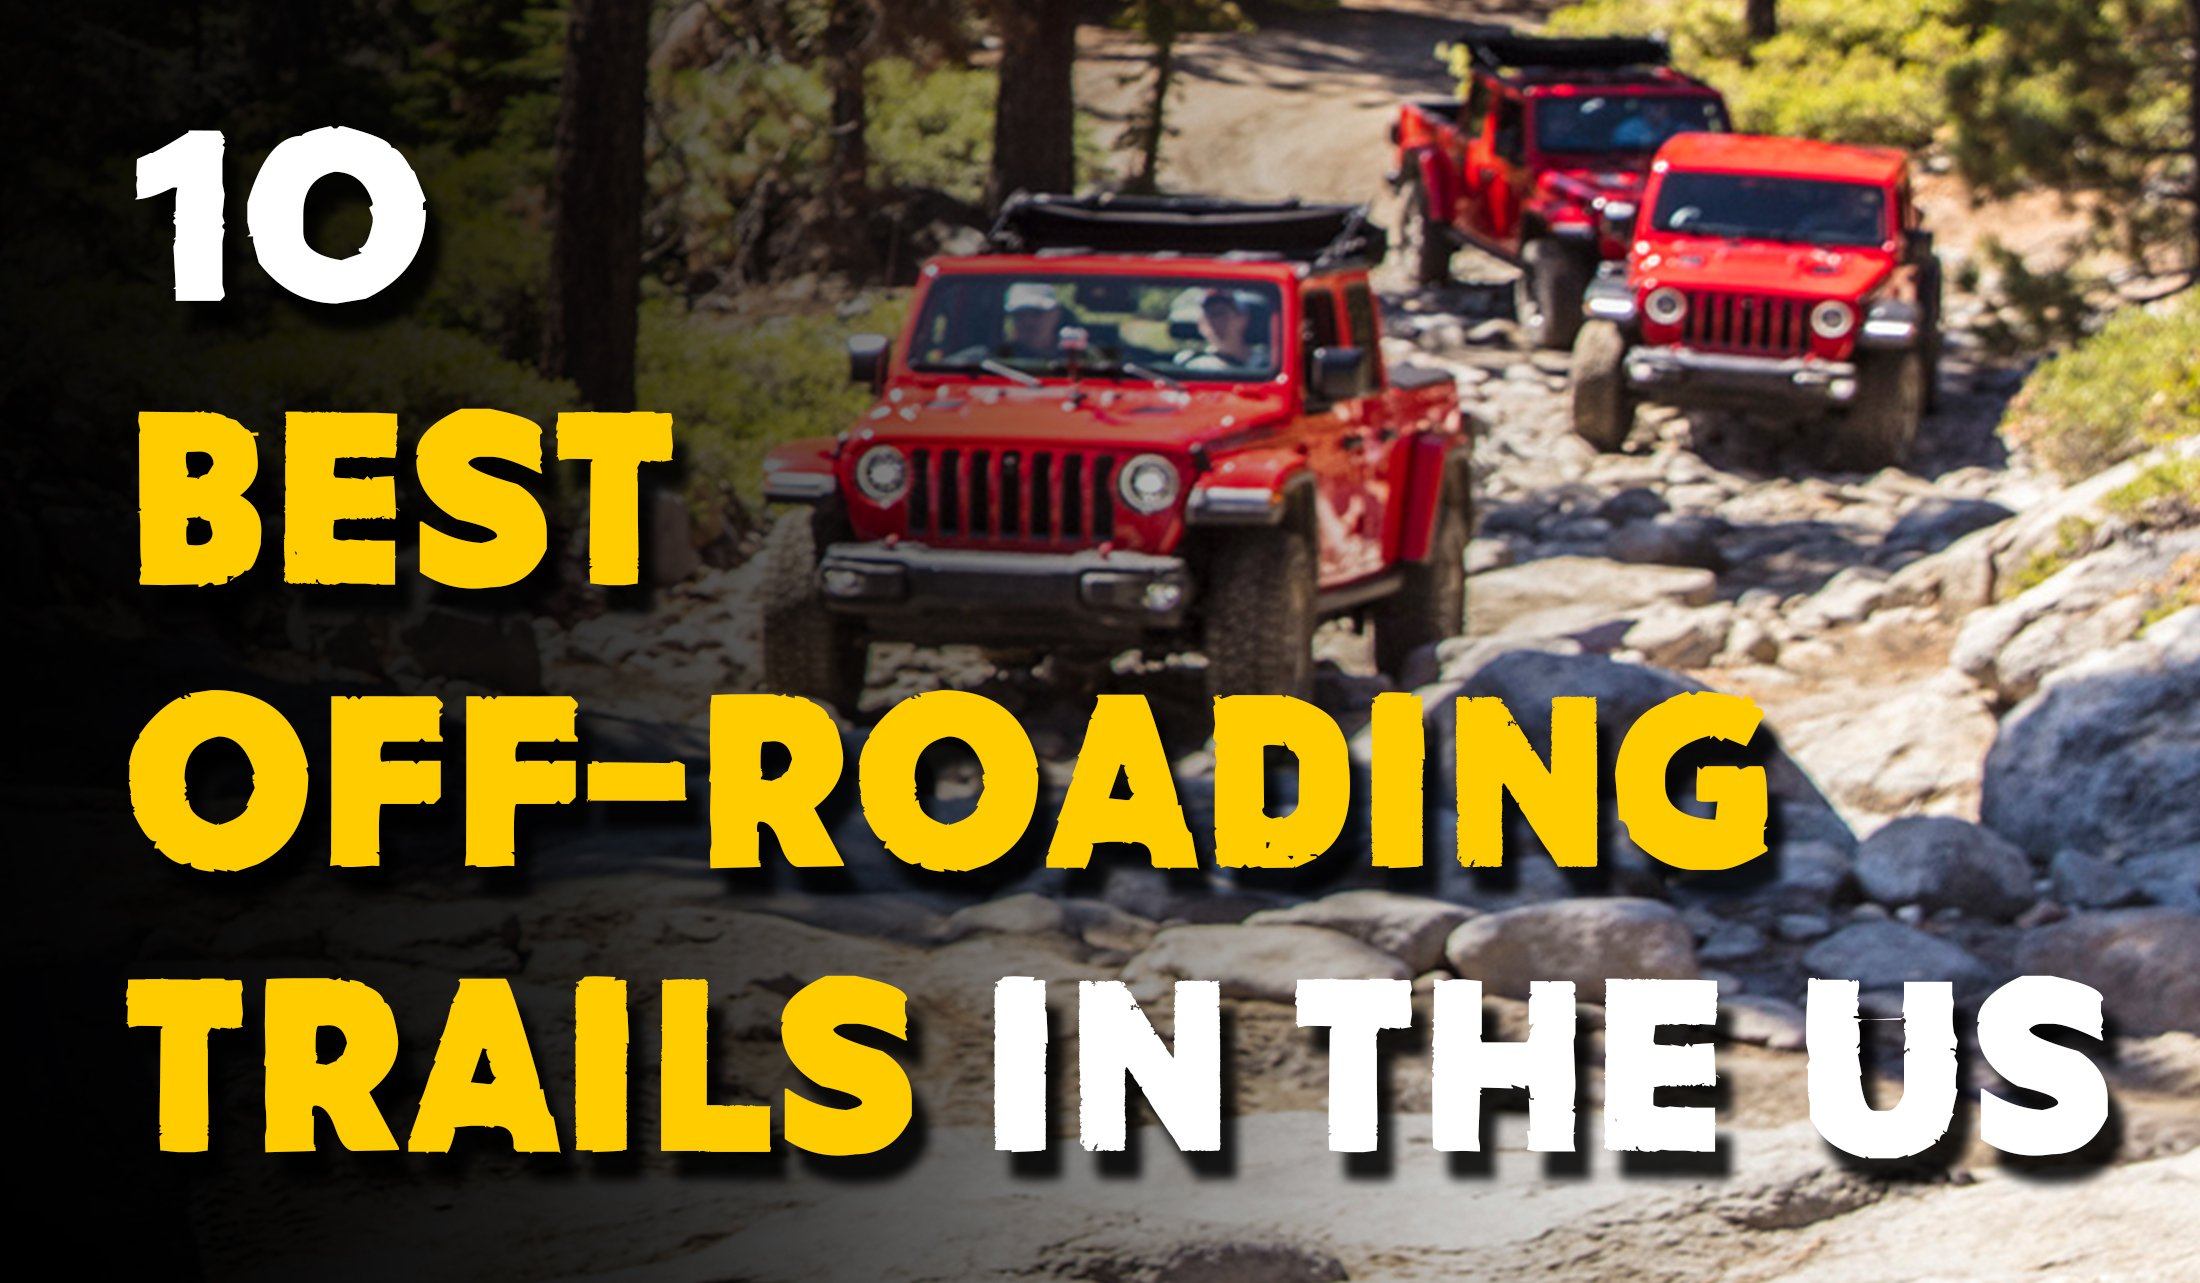 10 Best Off-Roading Trails in the US